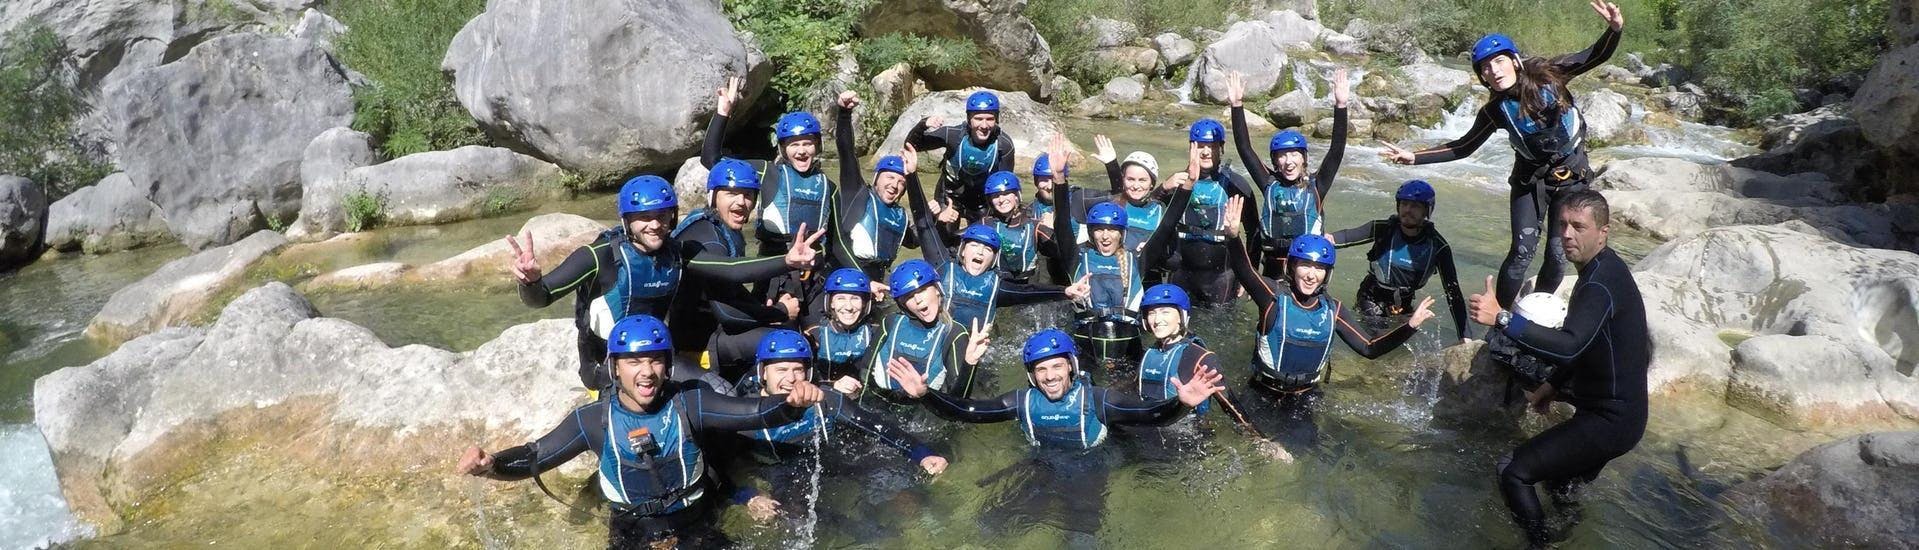 Friends are Canyoning in the Cetina River near Omiš - Basic Tour with Dalmare Travel Agency Omiš.